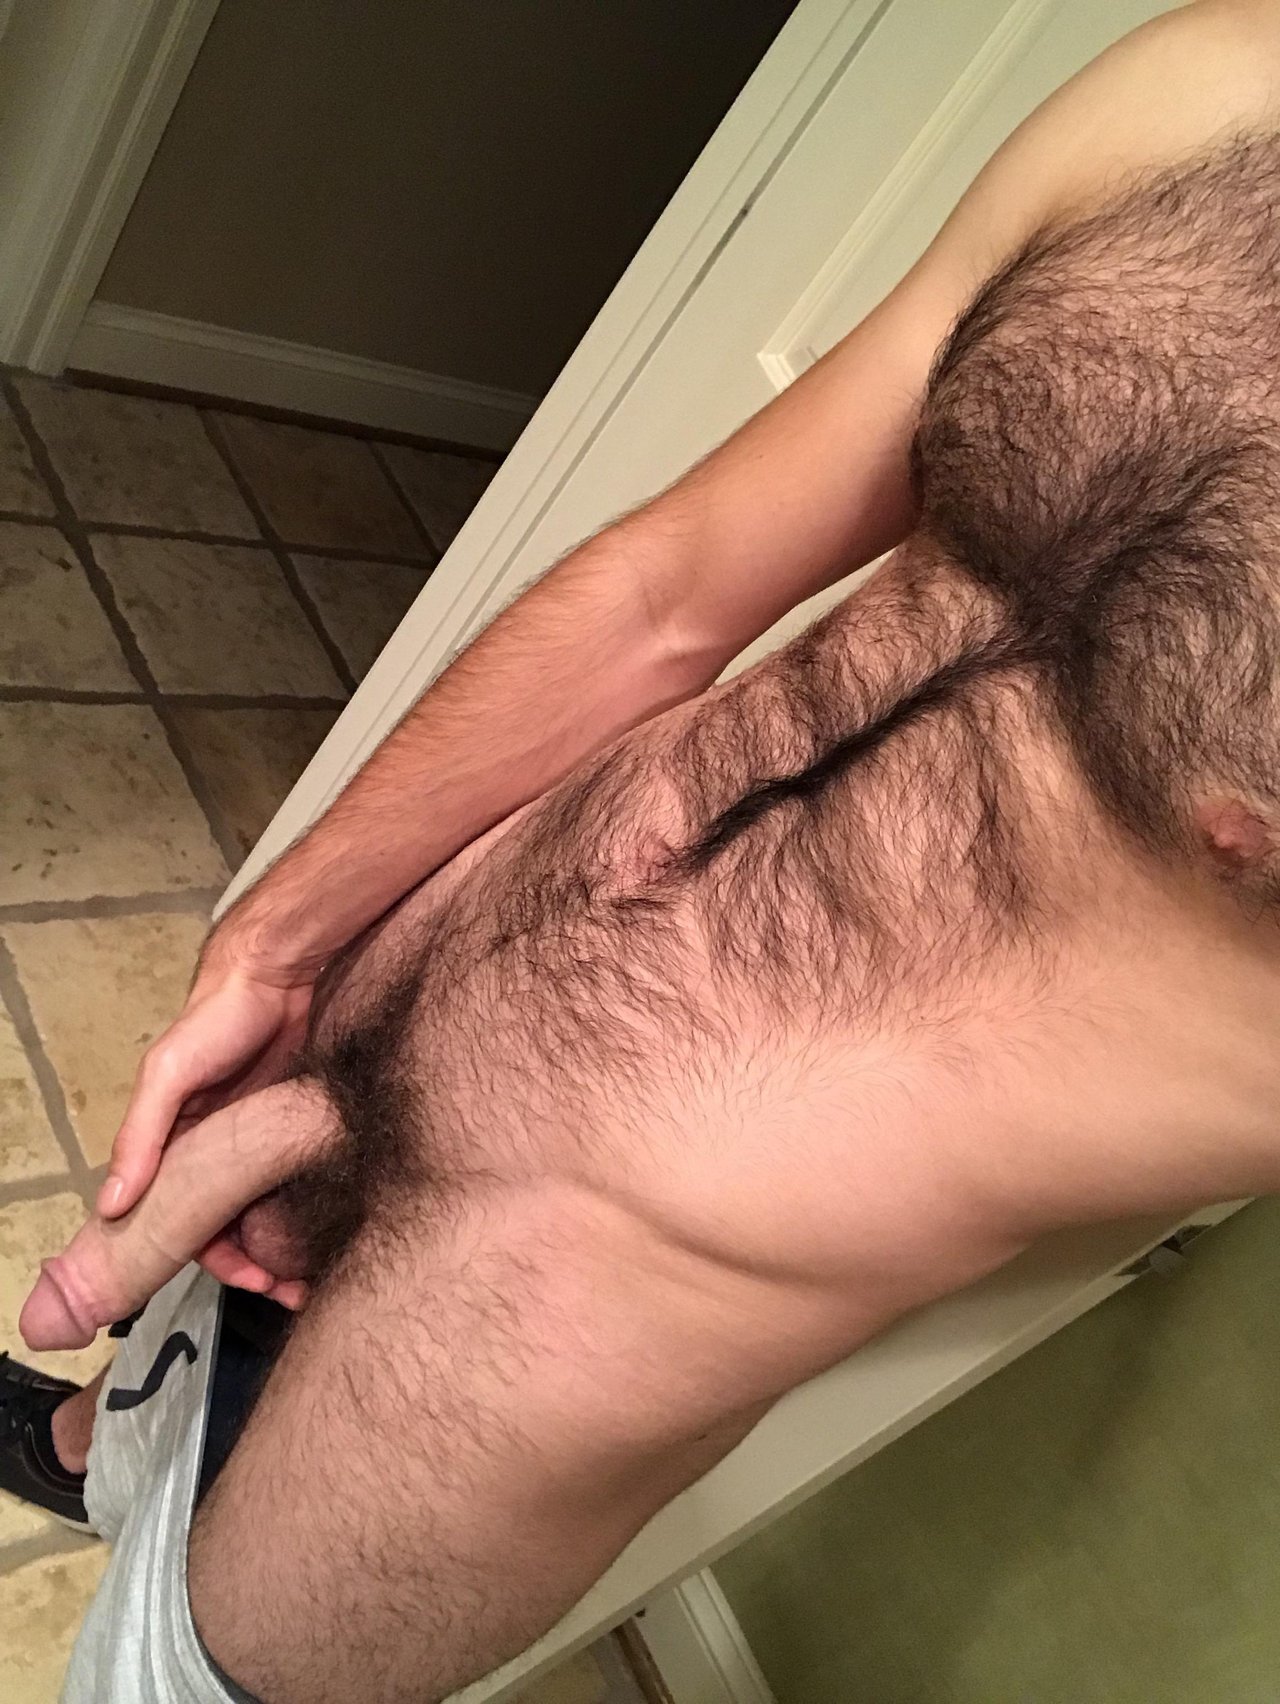 littlebottomspoon: jizzdiary:  Matt that fur with spunk  I love the smell of His